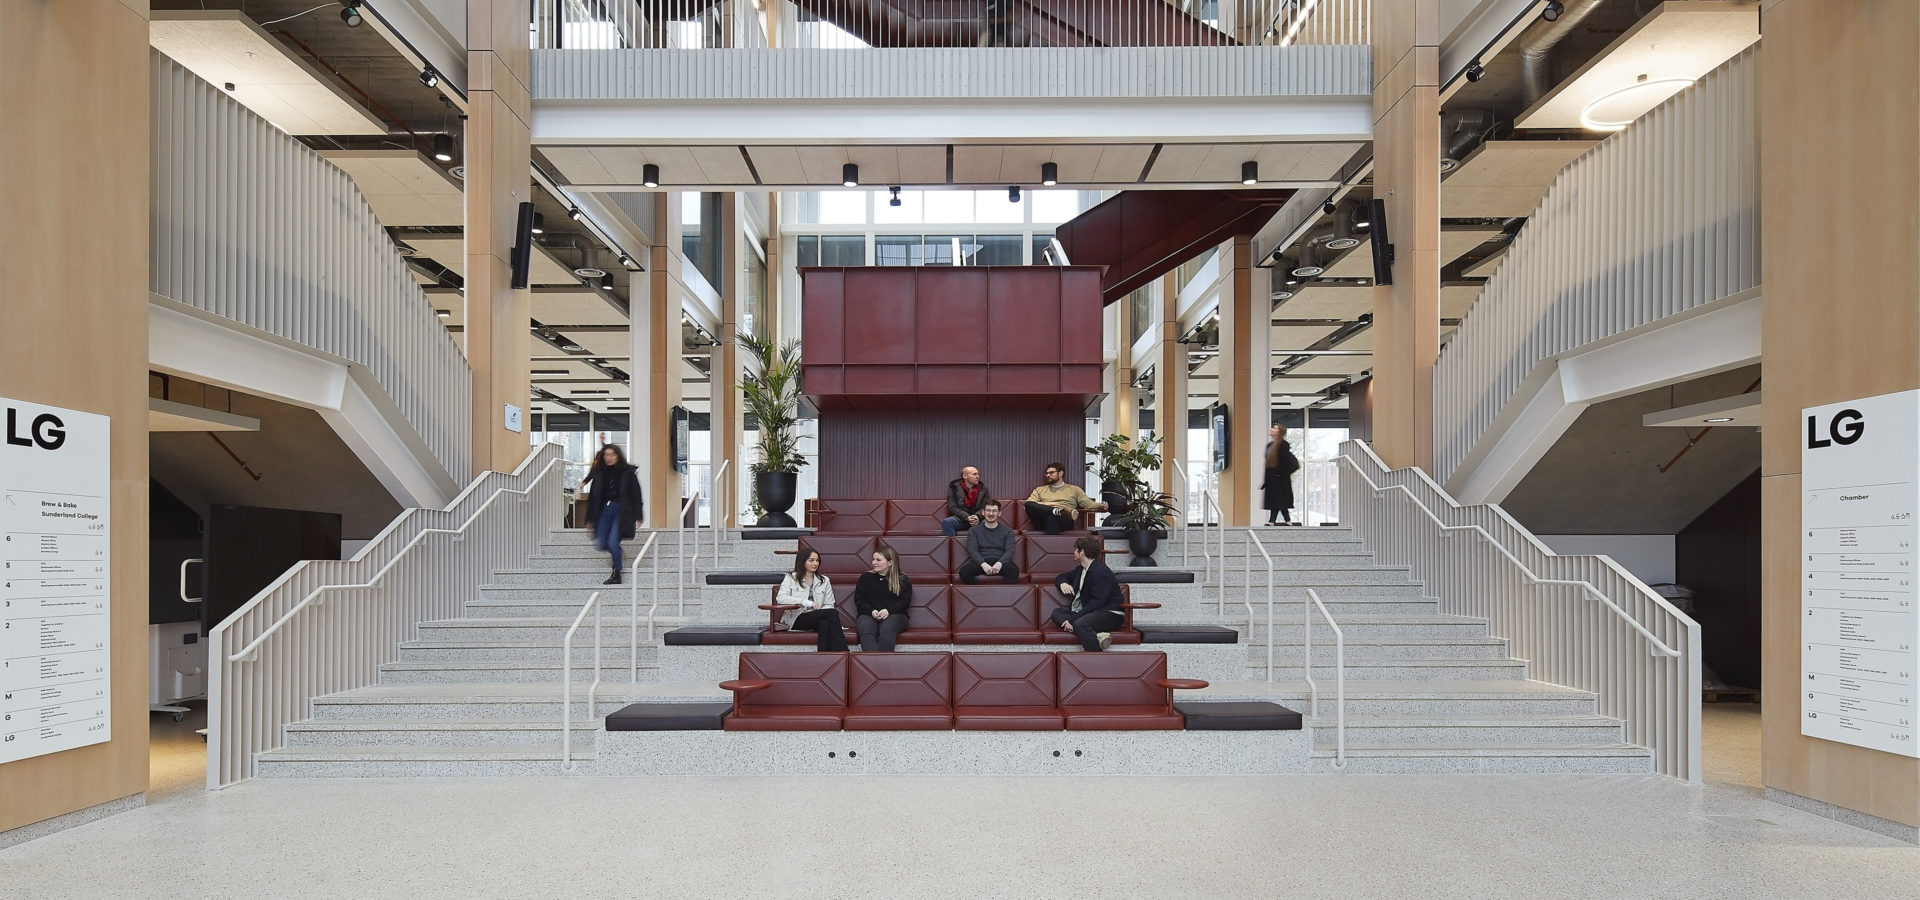 City Hall Faulknerbrowns Architects Sunderland Bco Awards Best Corporate Workplace Staircase Hh